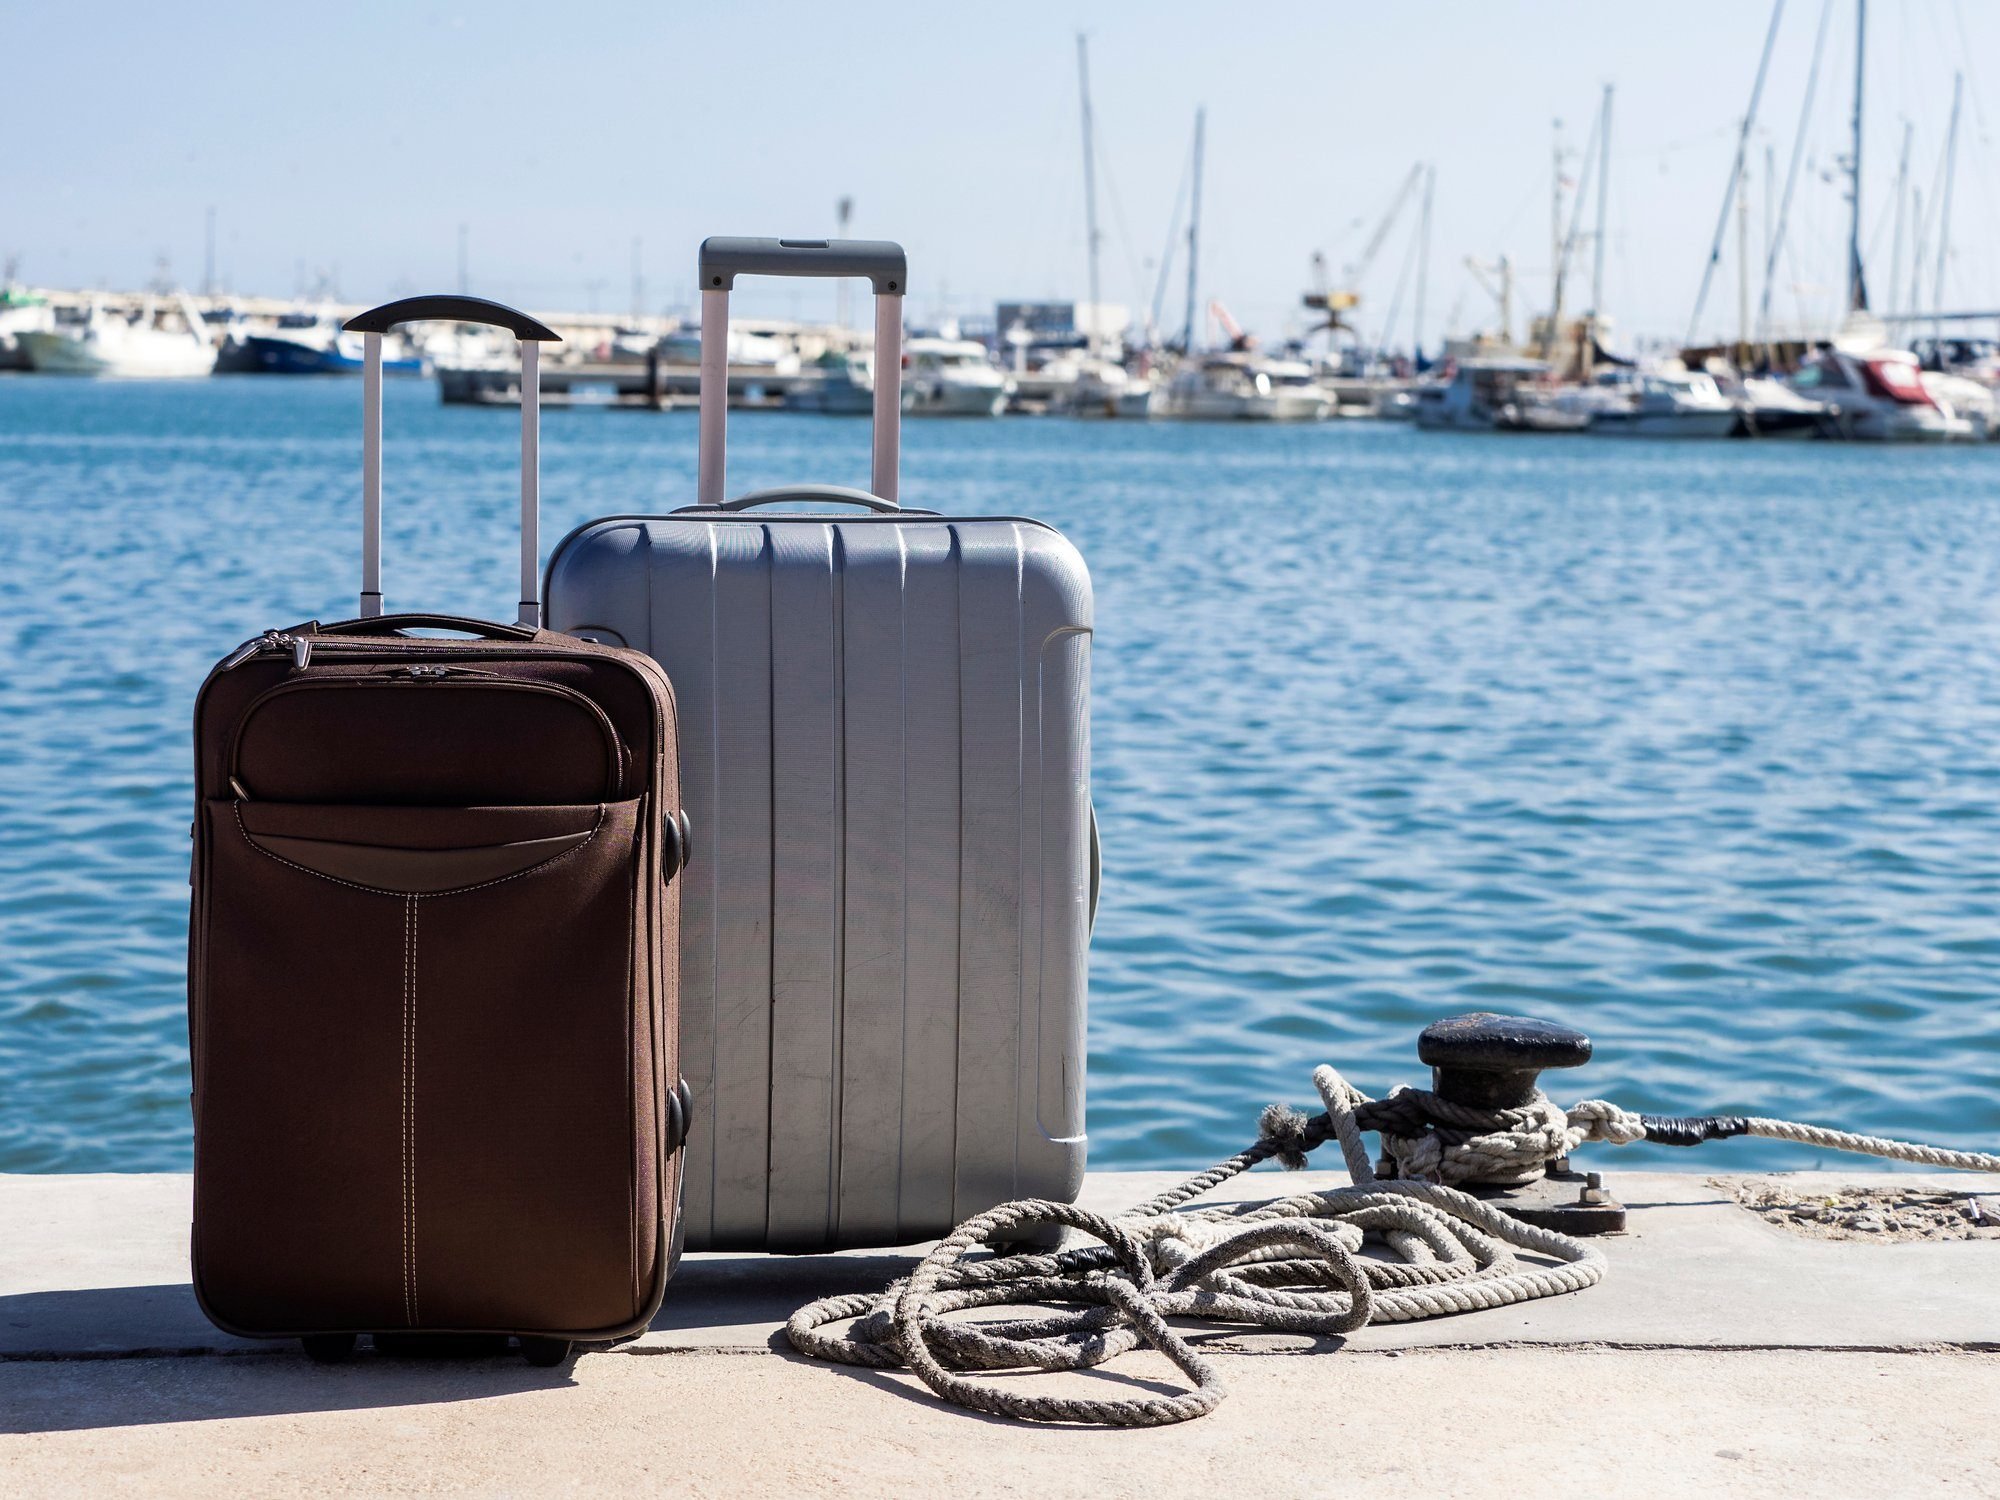 Suitcases prepared next to a pier at sea to board a passenger ship